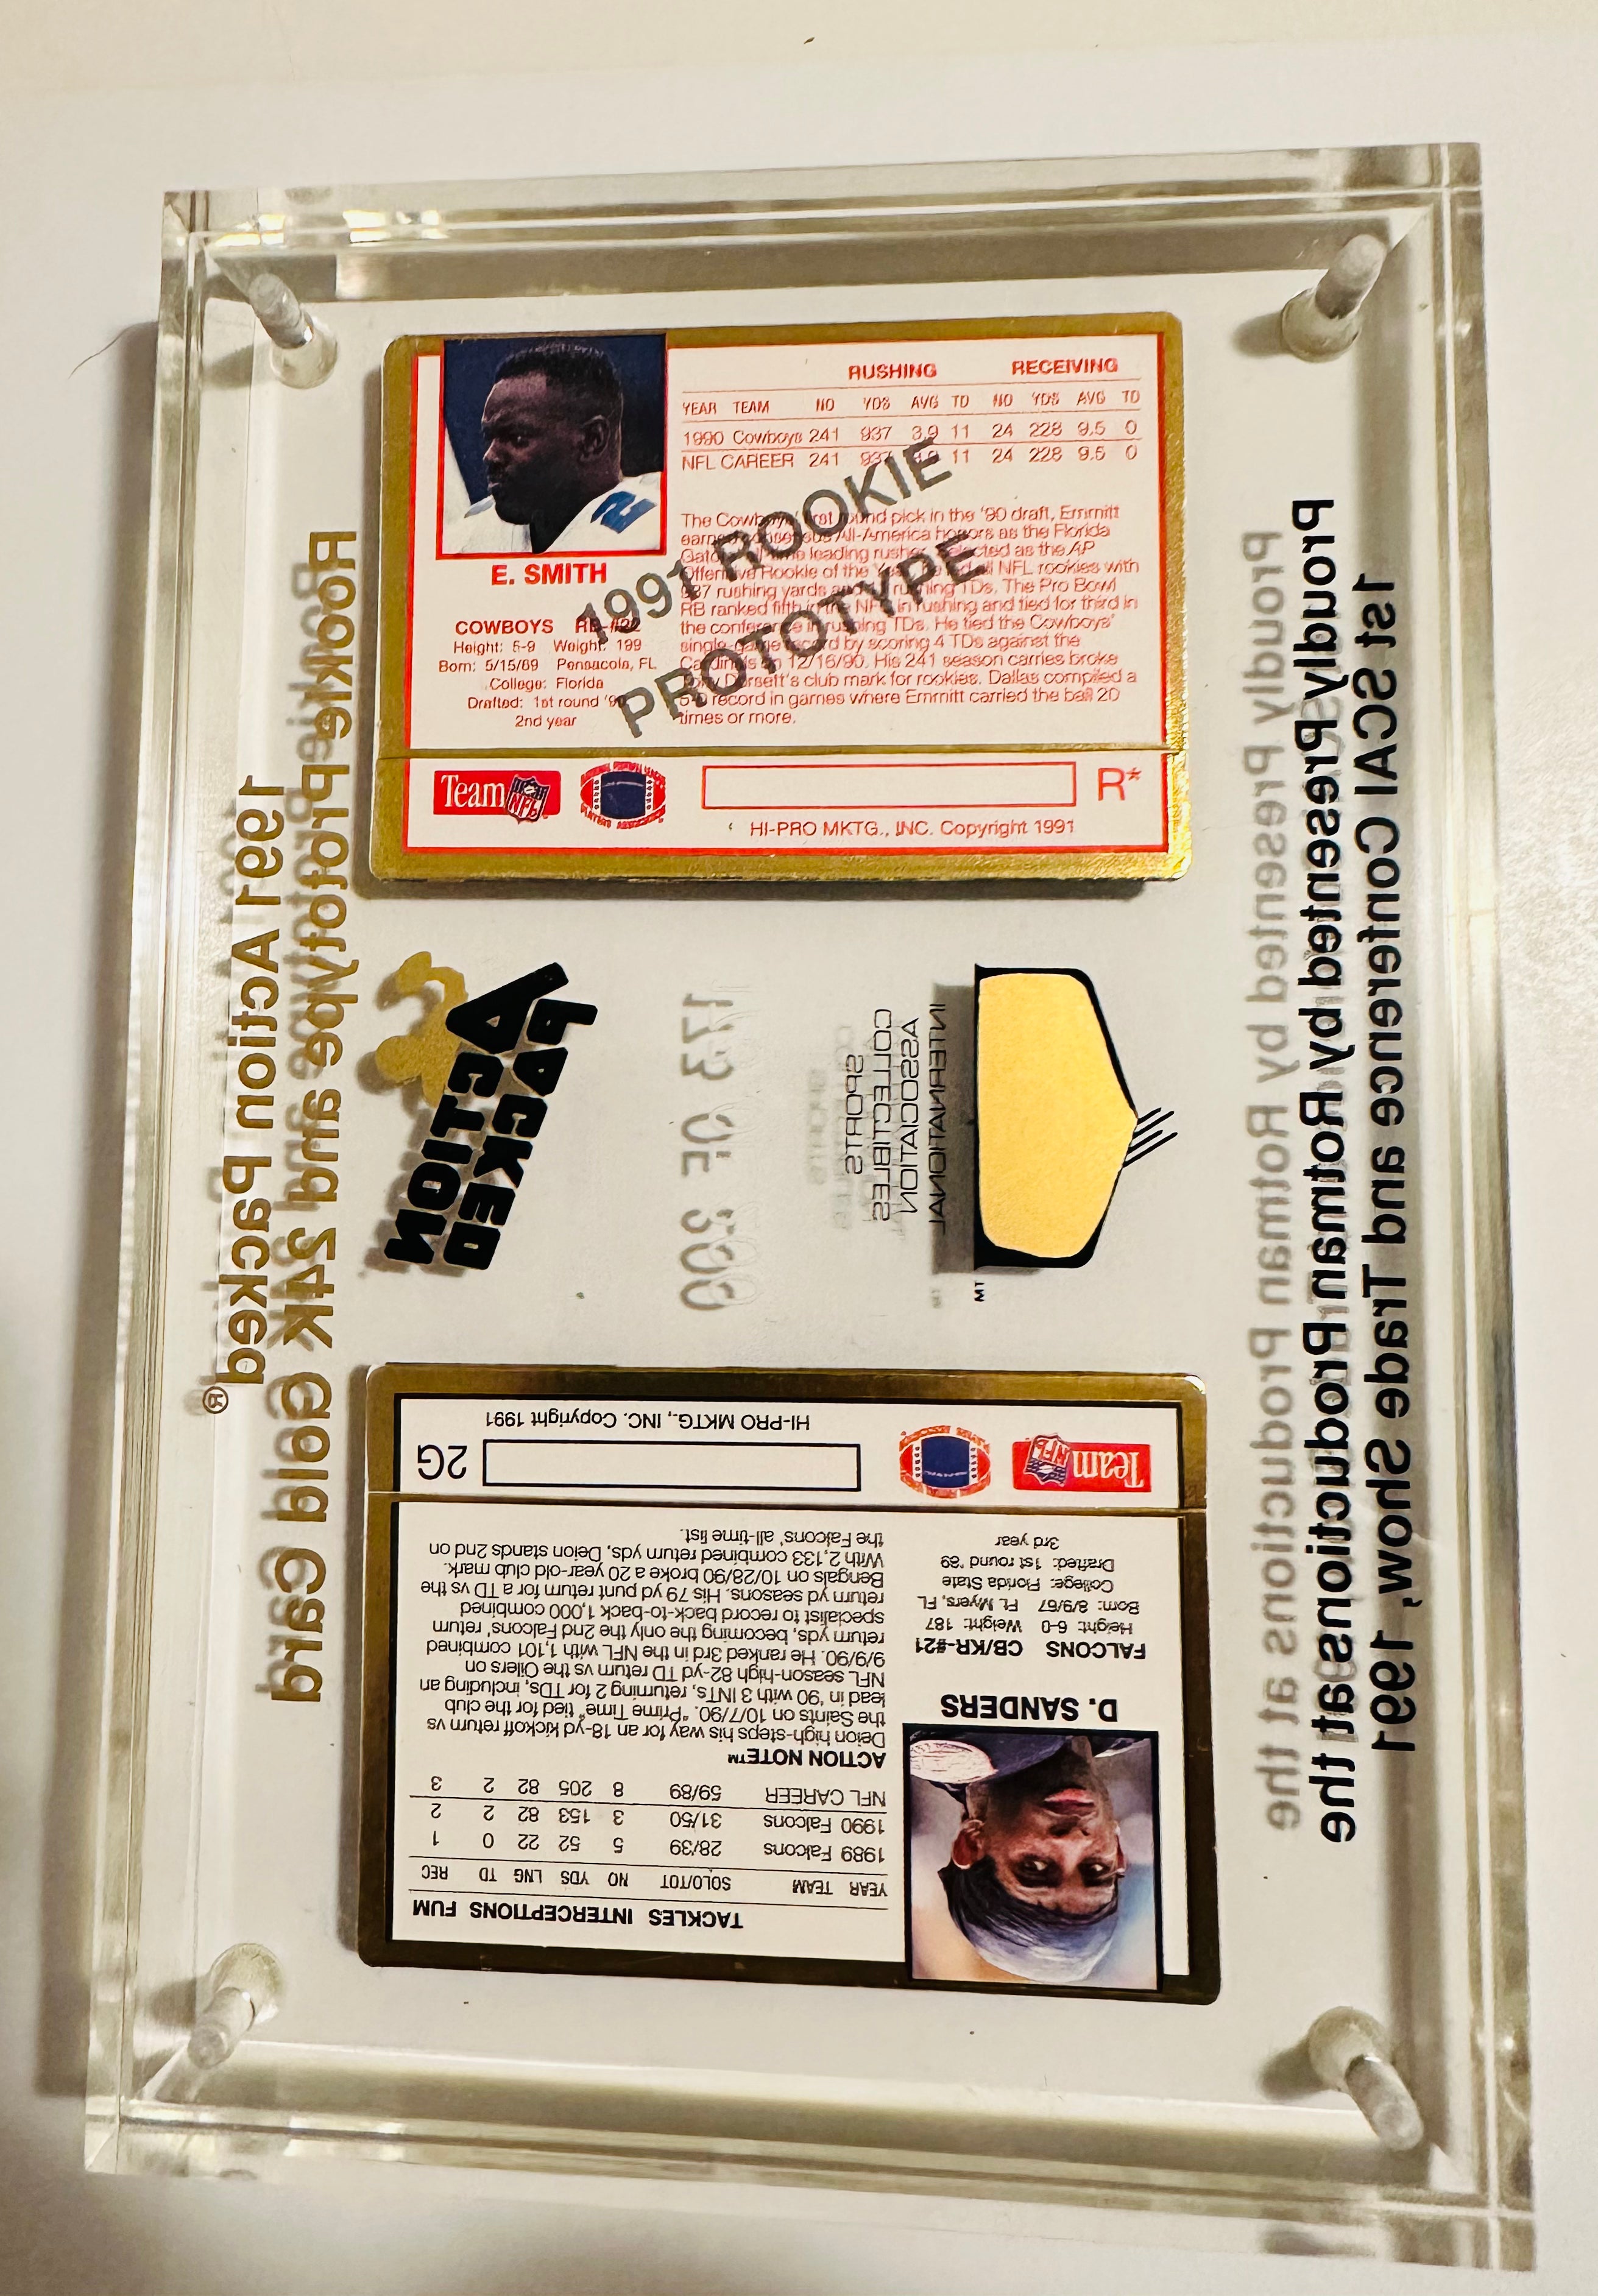 Action Packed rare SCA dinner numbered lucite football display with Emmitt Smith rookie promo #173/200